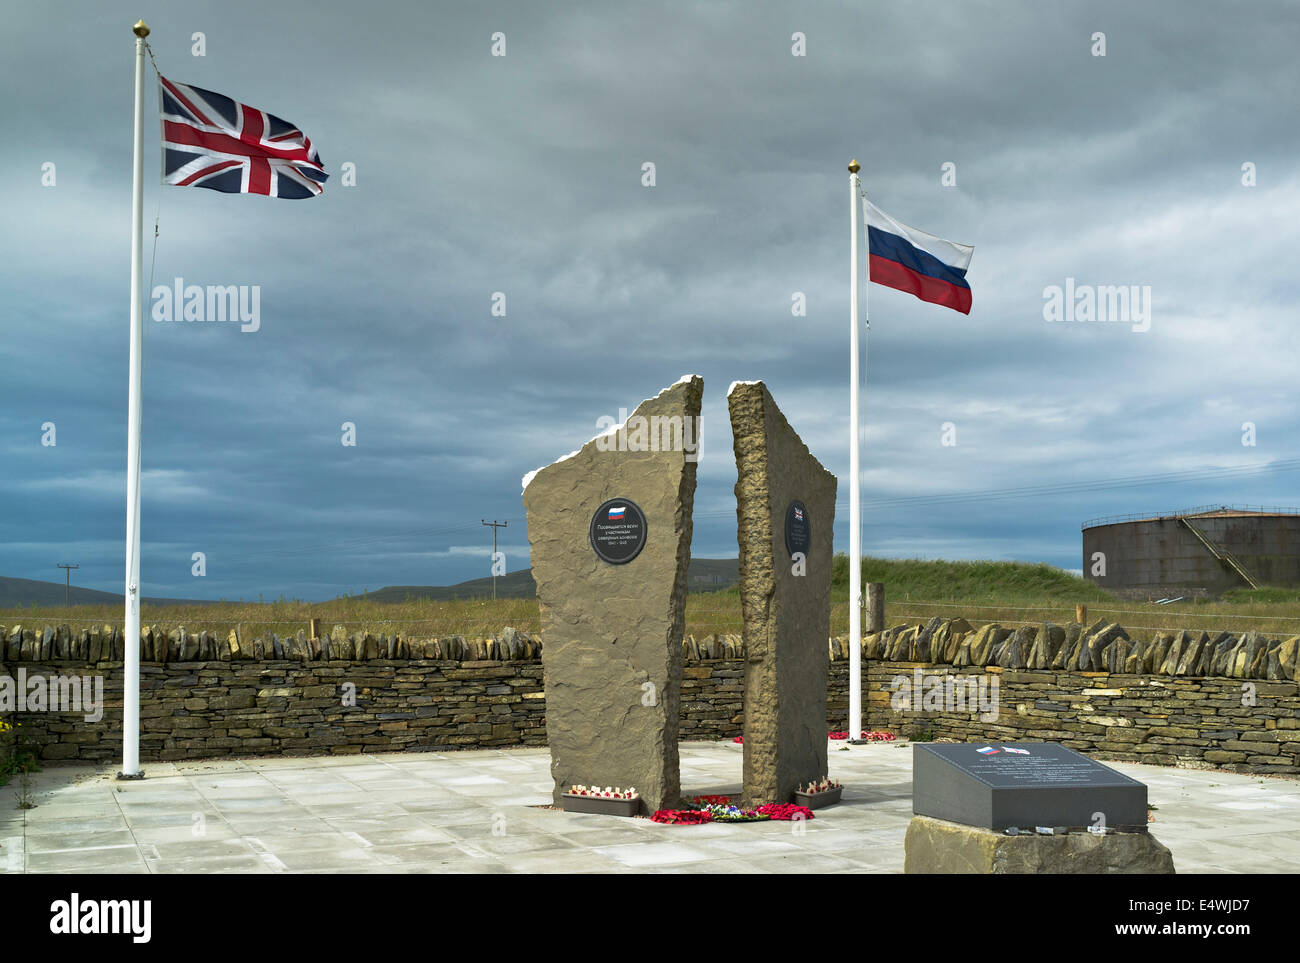 dh Arctic convoy Monument HOY LYNESS ORKNEY SCOTLAND World war ii 2 memorial russian flag and union jack flag ww2 Stock Photo